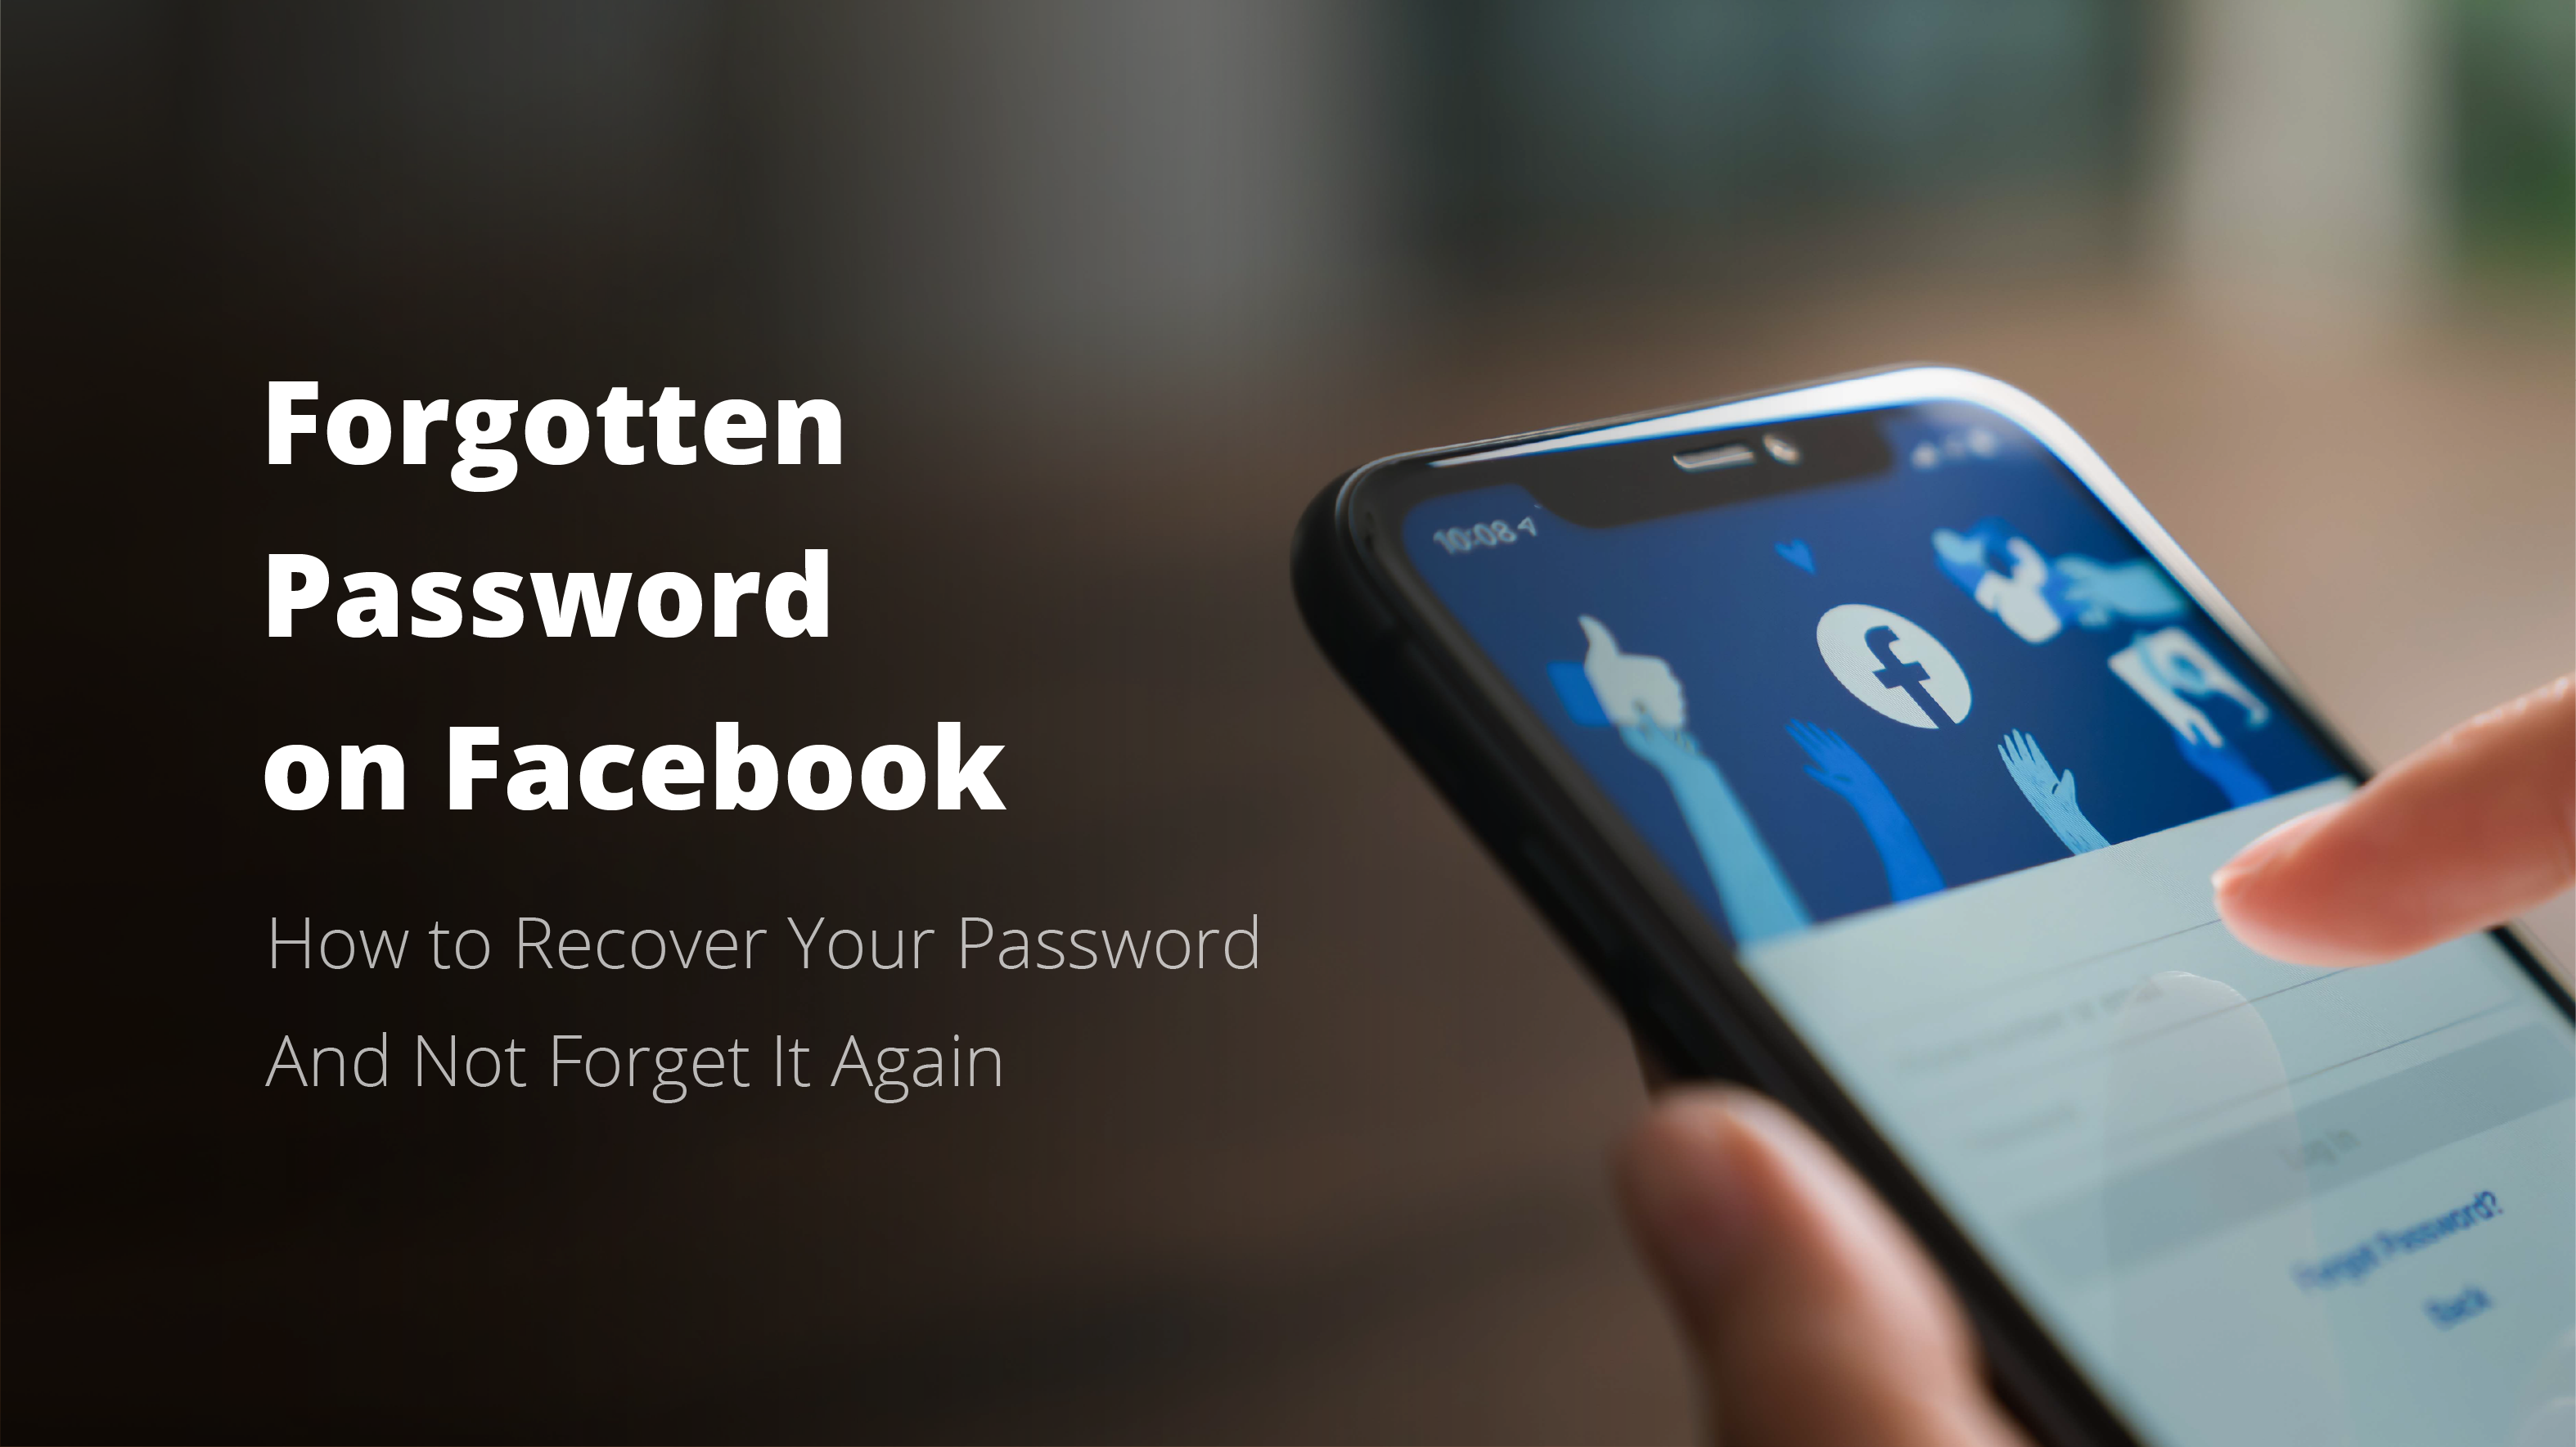 How to recover forgotten password on Facebook?